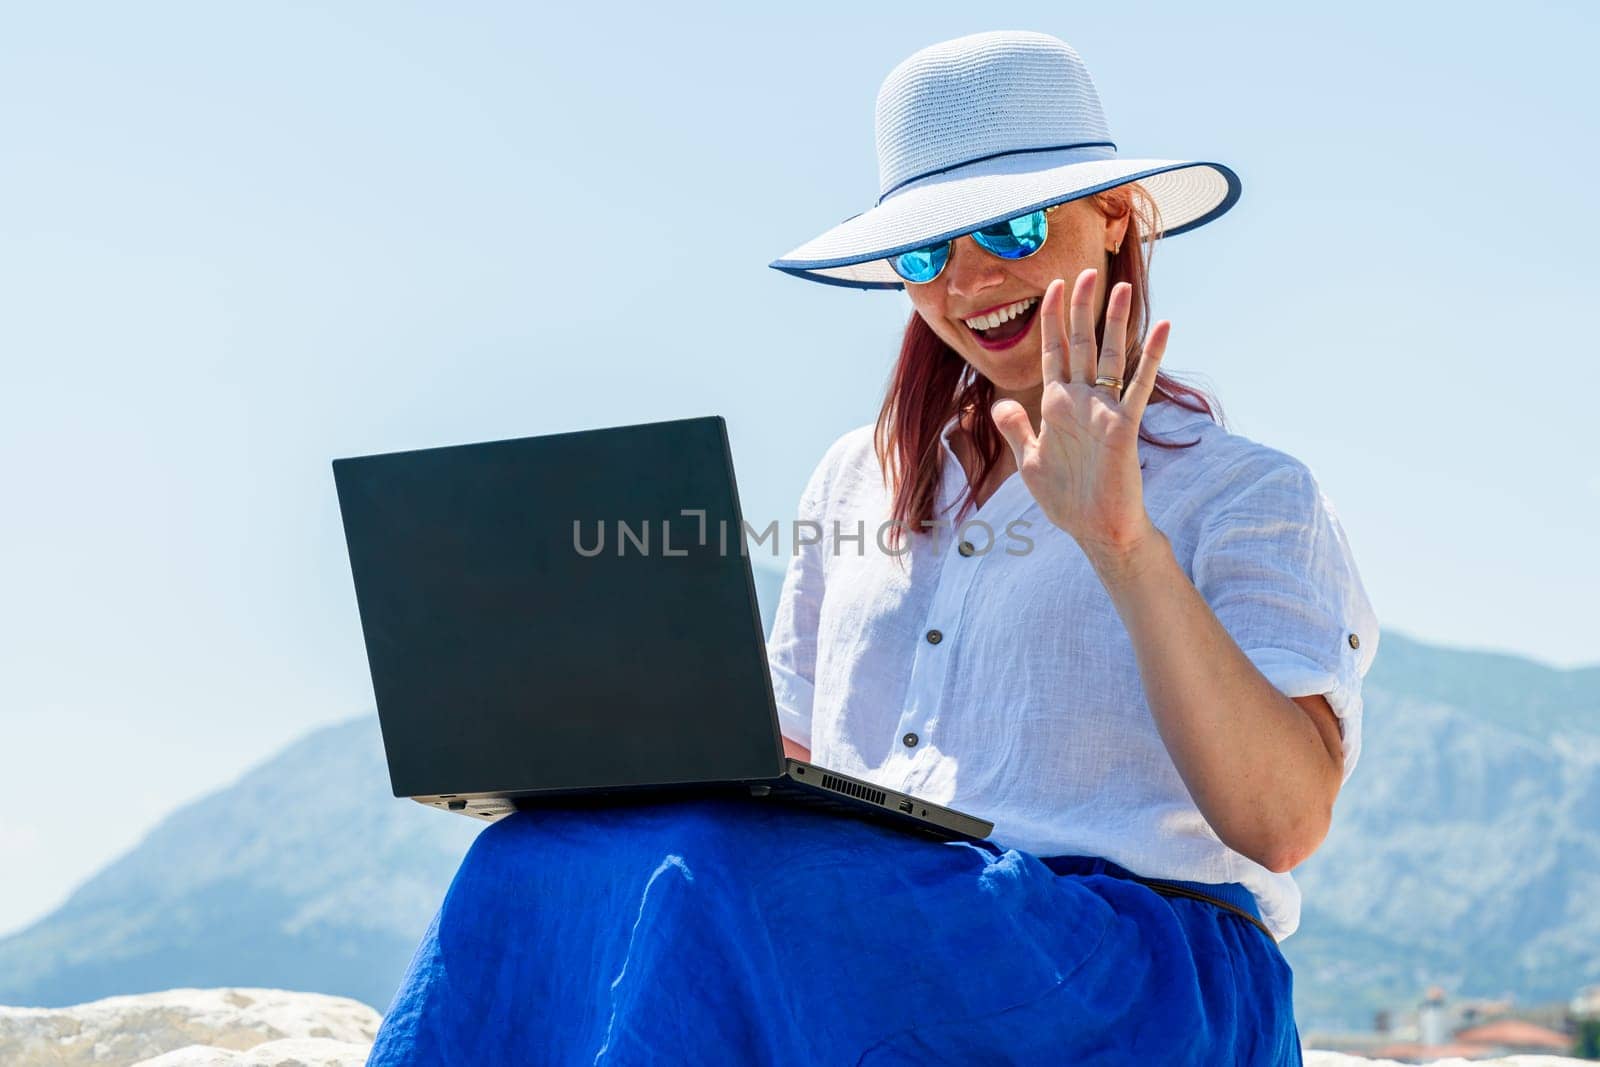 A woman employee is engrossed in her tasks on the laptop amidst the tranquil seaside environment, skillfully juggling work and vacation time for a refreshing break.